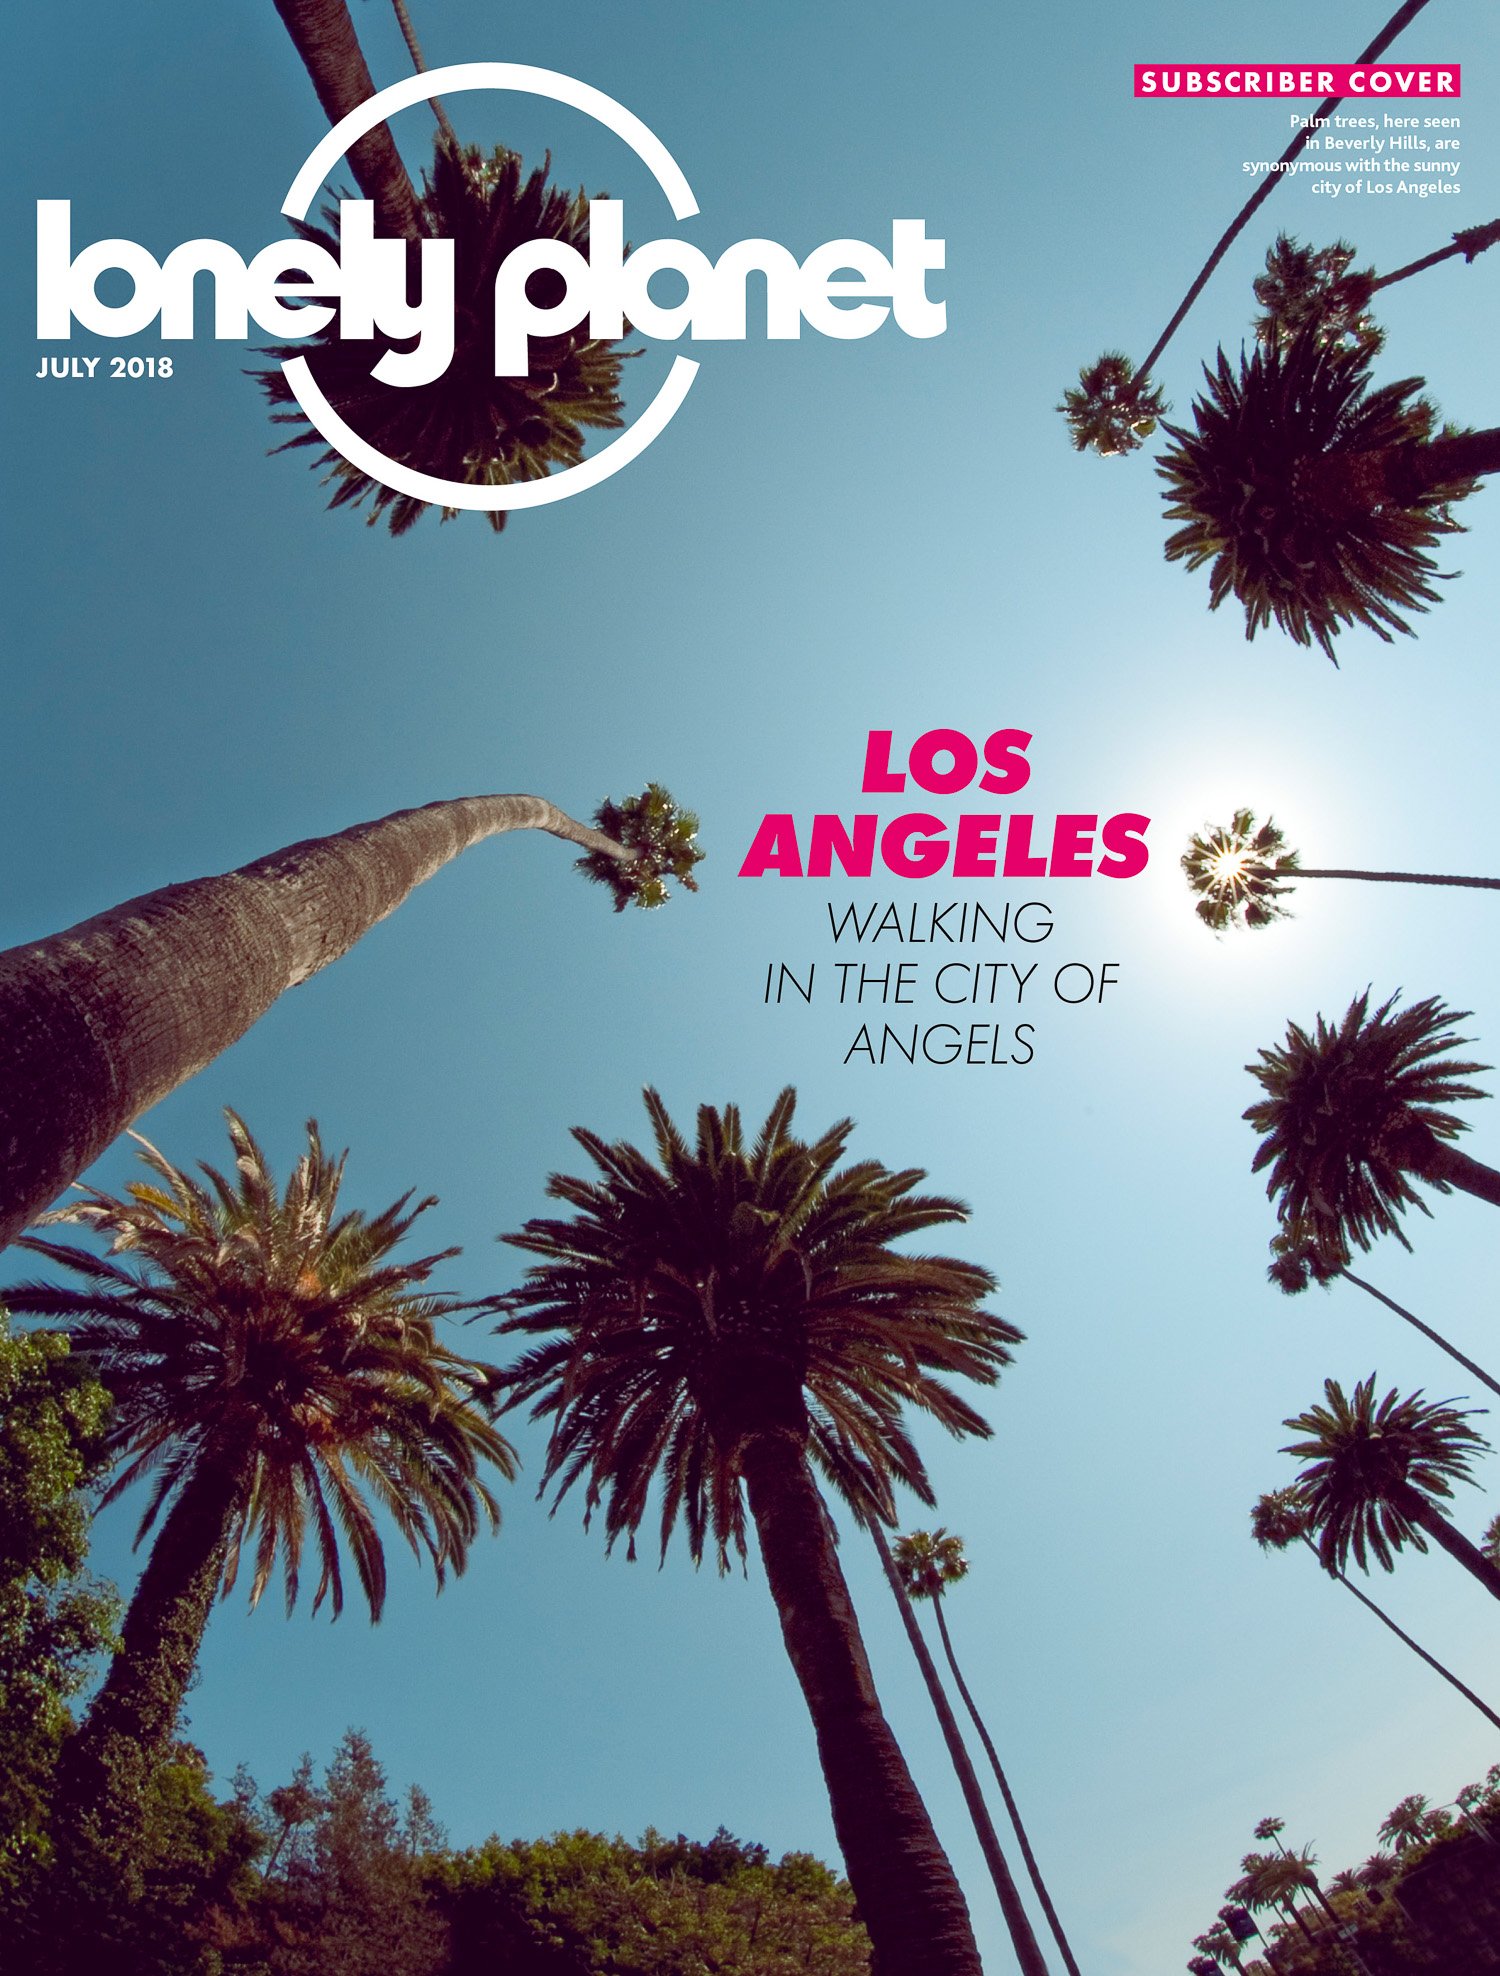 cover photo from Lonely Planet travel magazine by photographer Simon Urwin